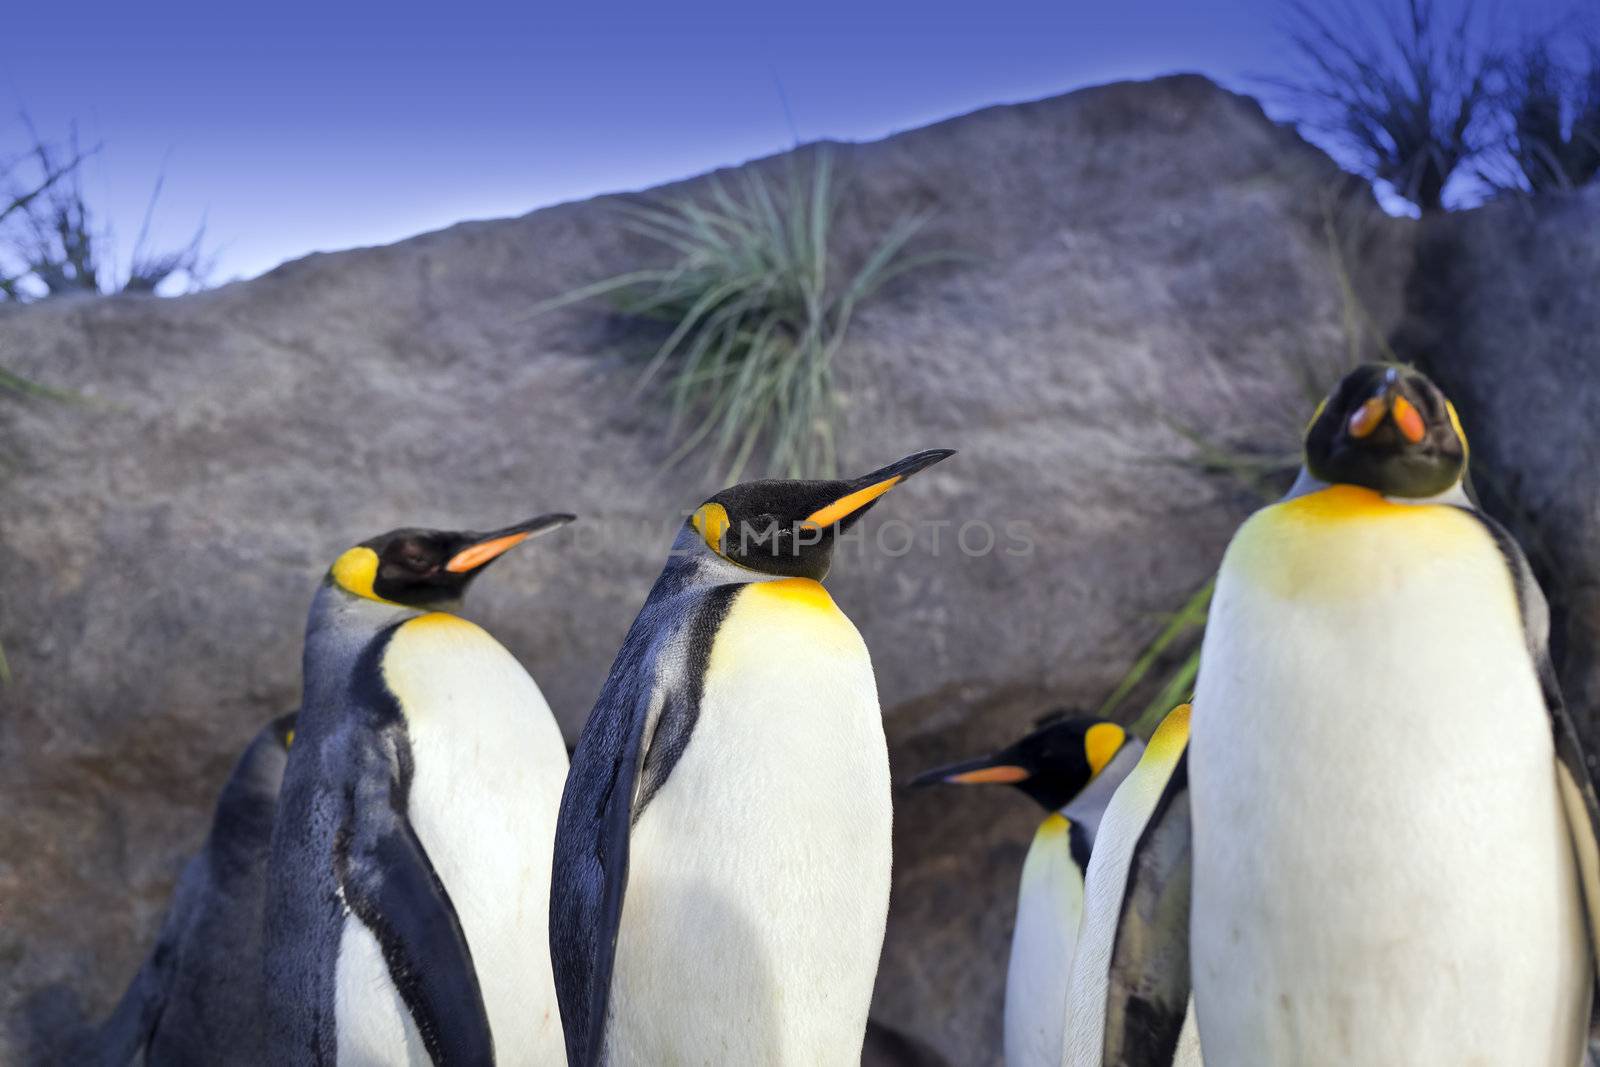 A close up shot of a group of King Penguins (Aptenodytes patagonicus)